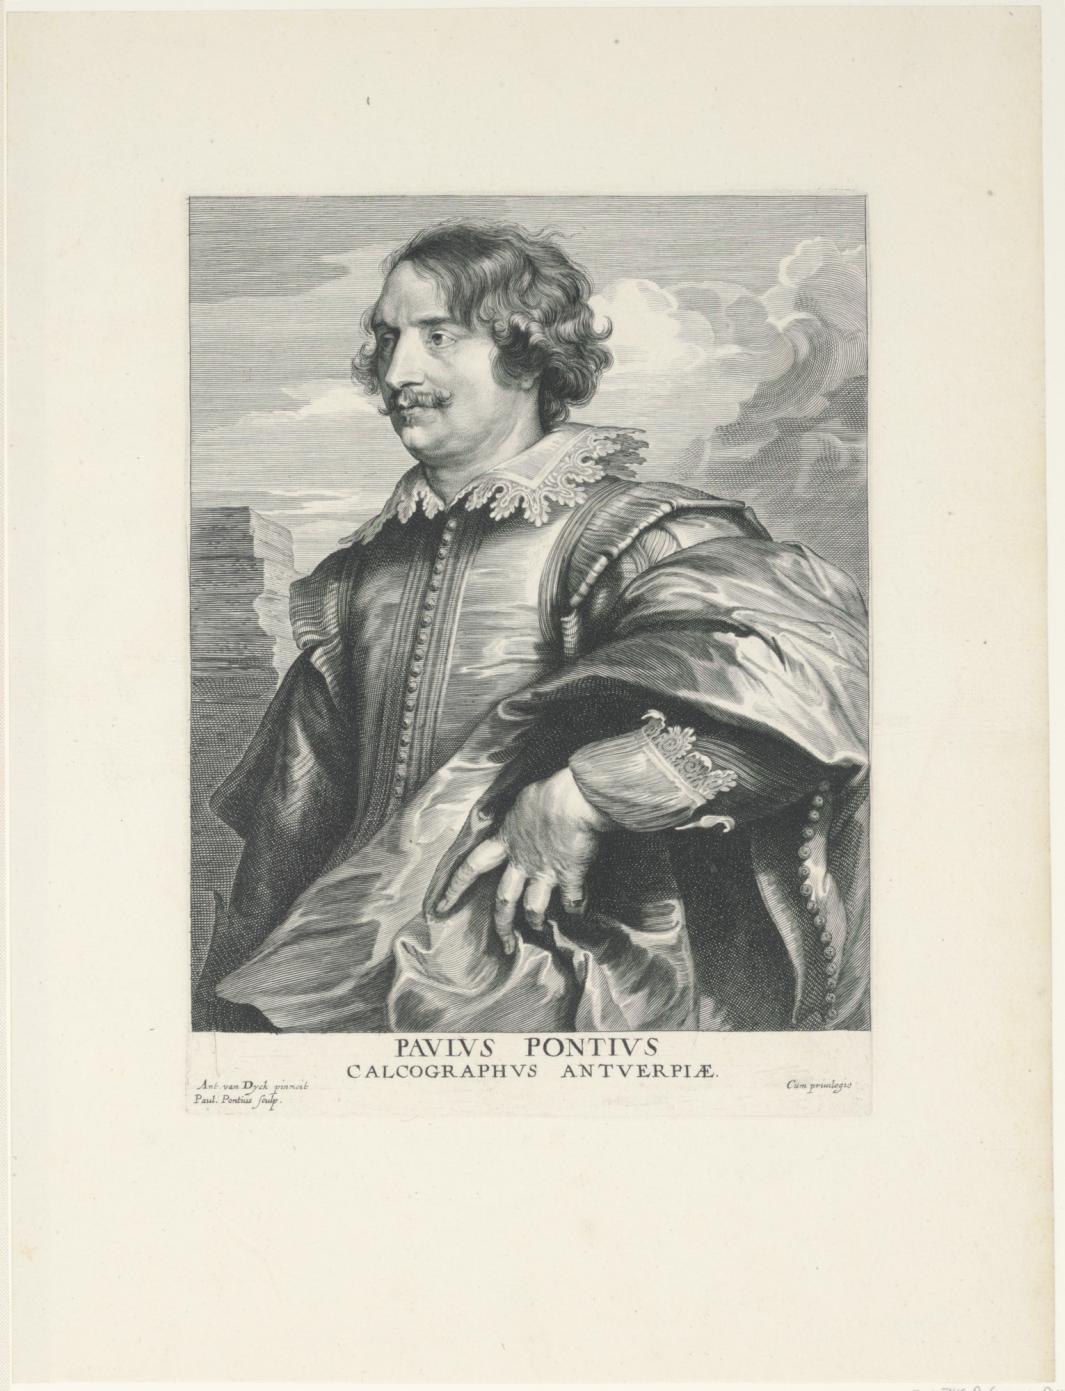 engraving of portrait of man in profile with draped clothing and lace collar, with caption